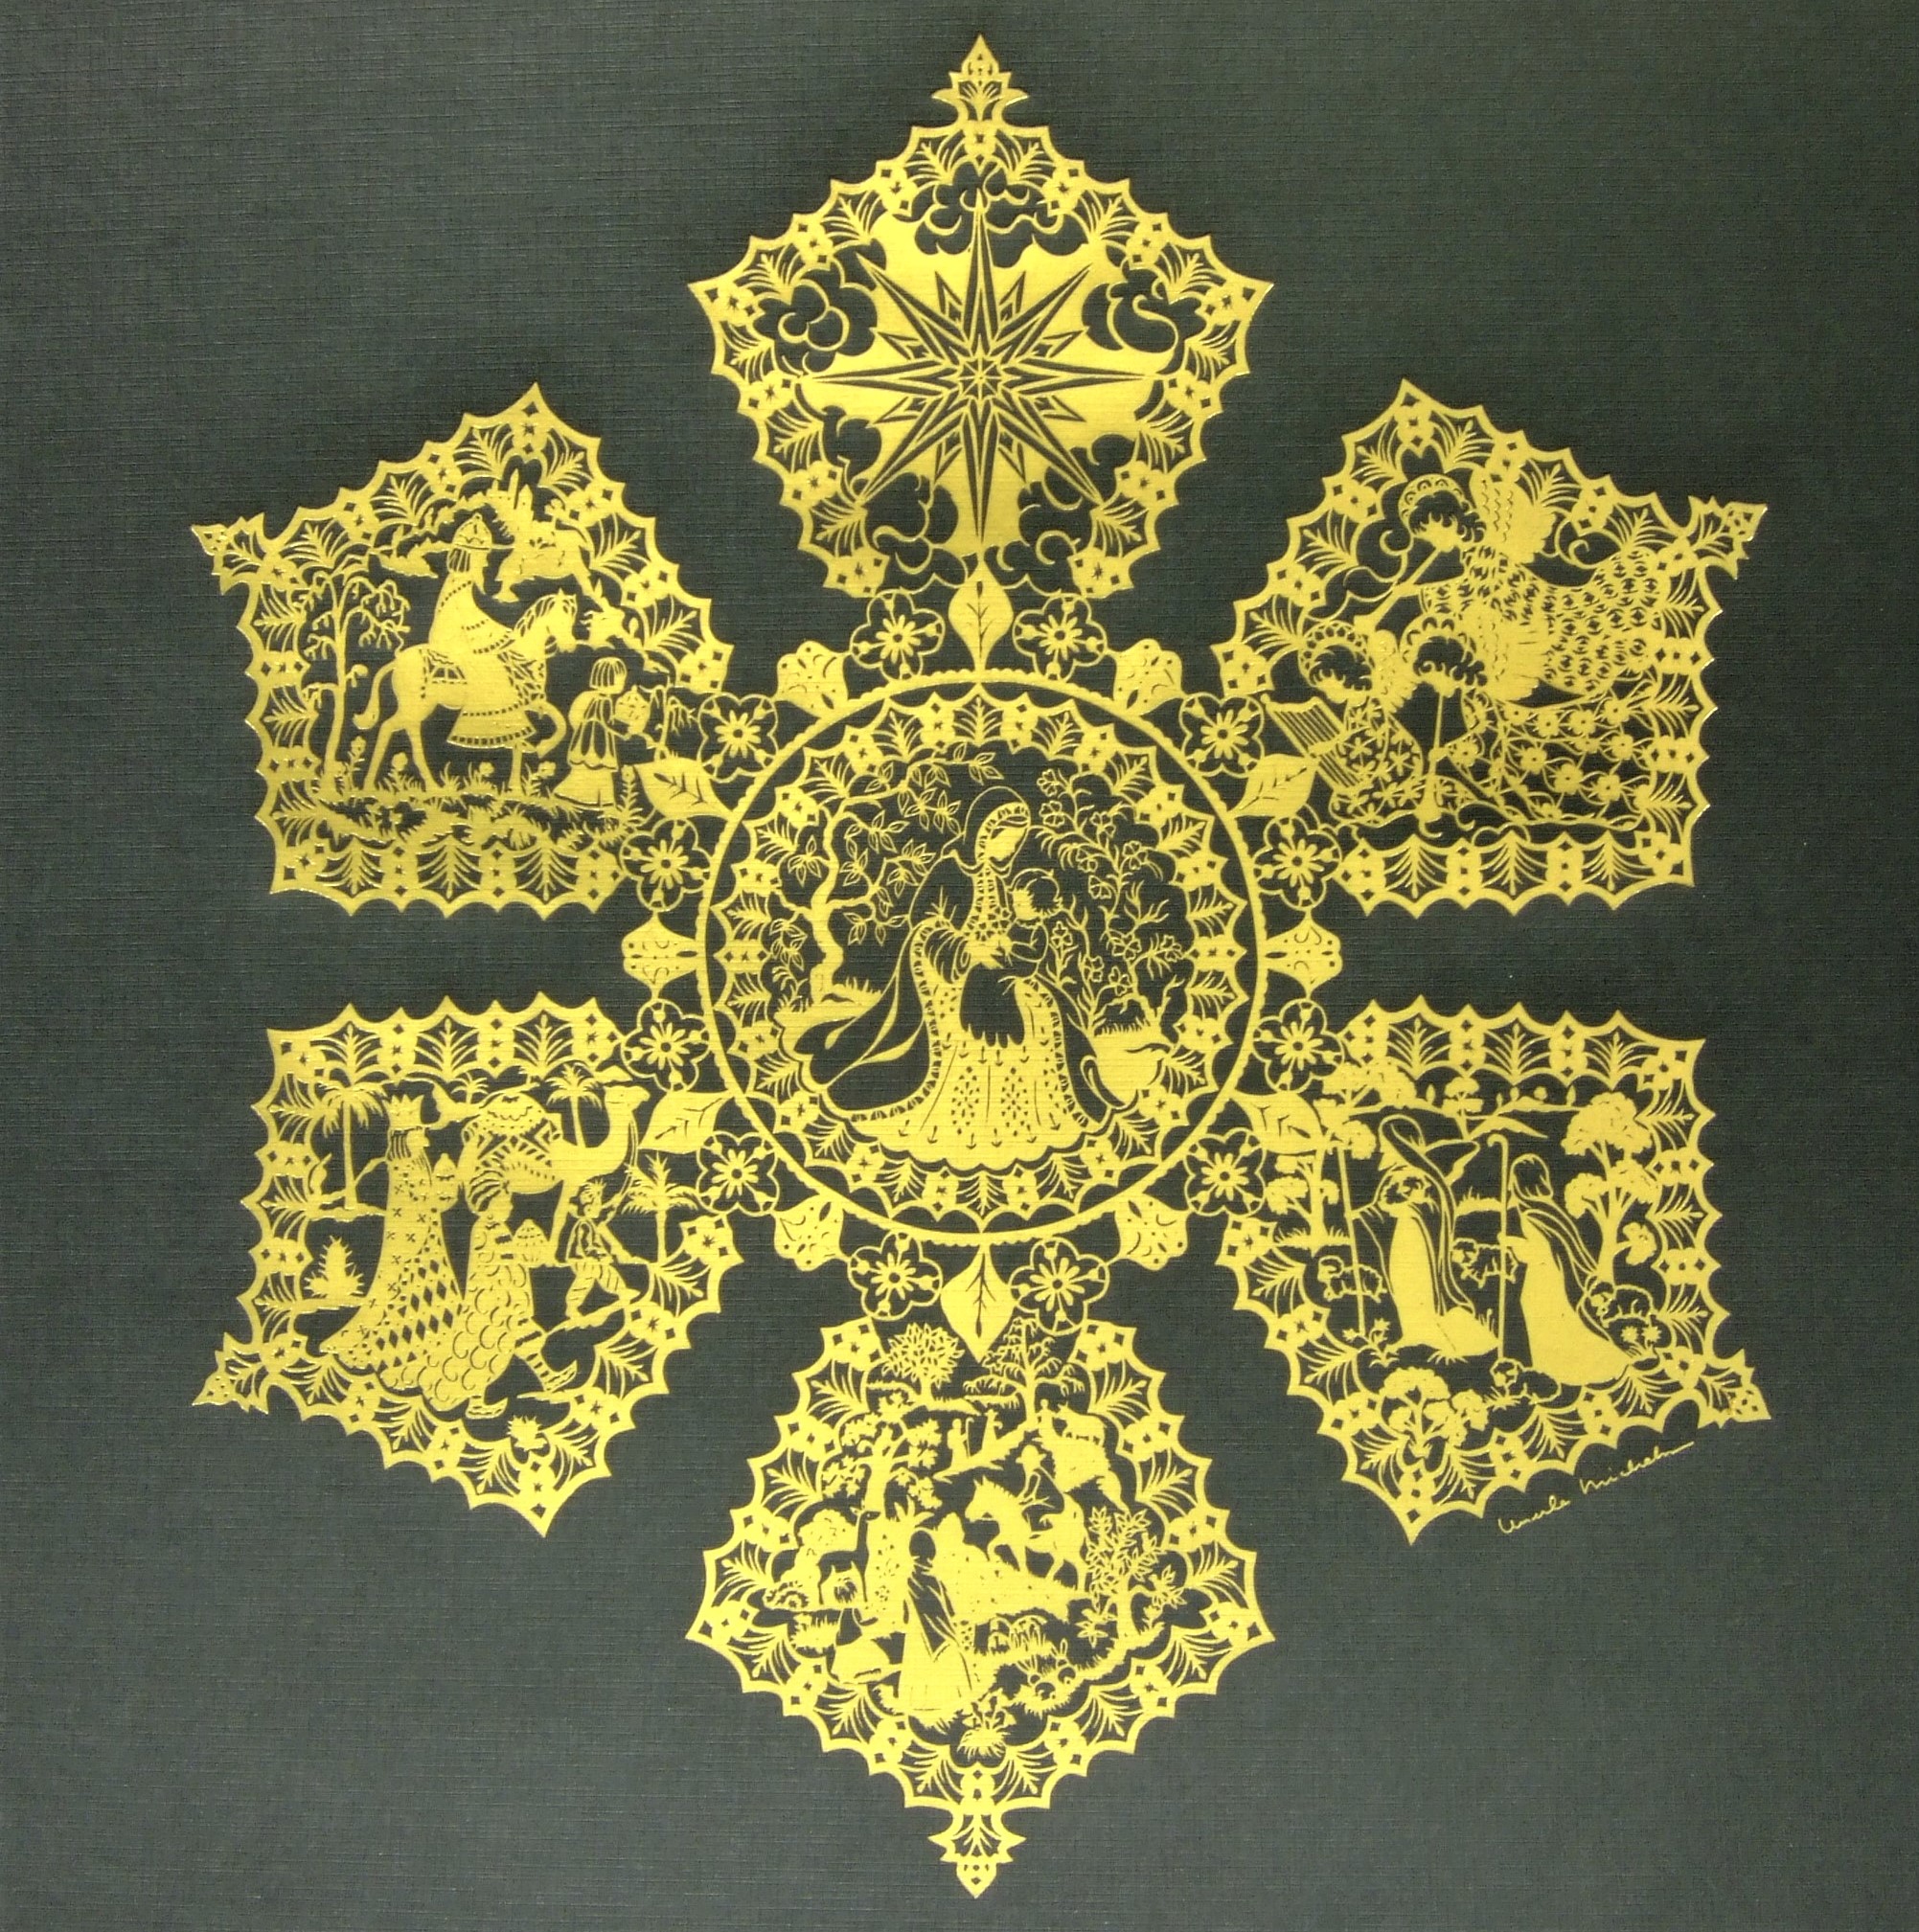 Nativity Snowflake paper cutting by Ursula Micheln. From the Marian Library Art and Artifacts Collection